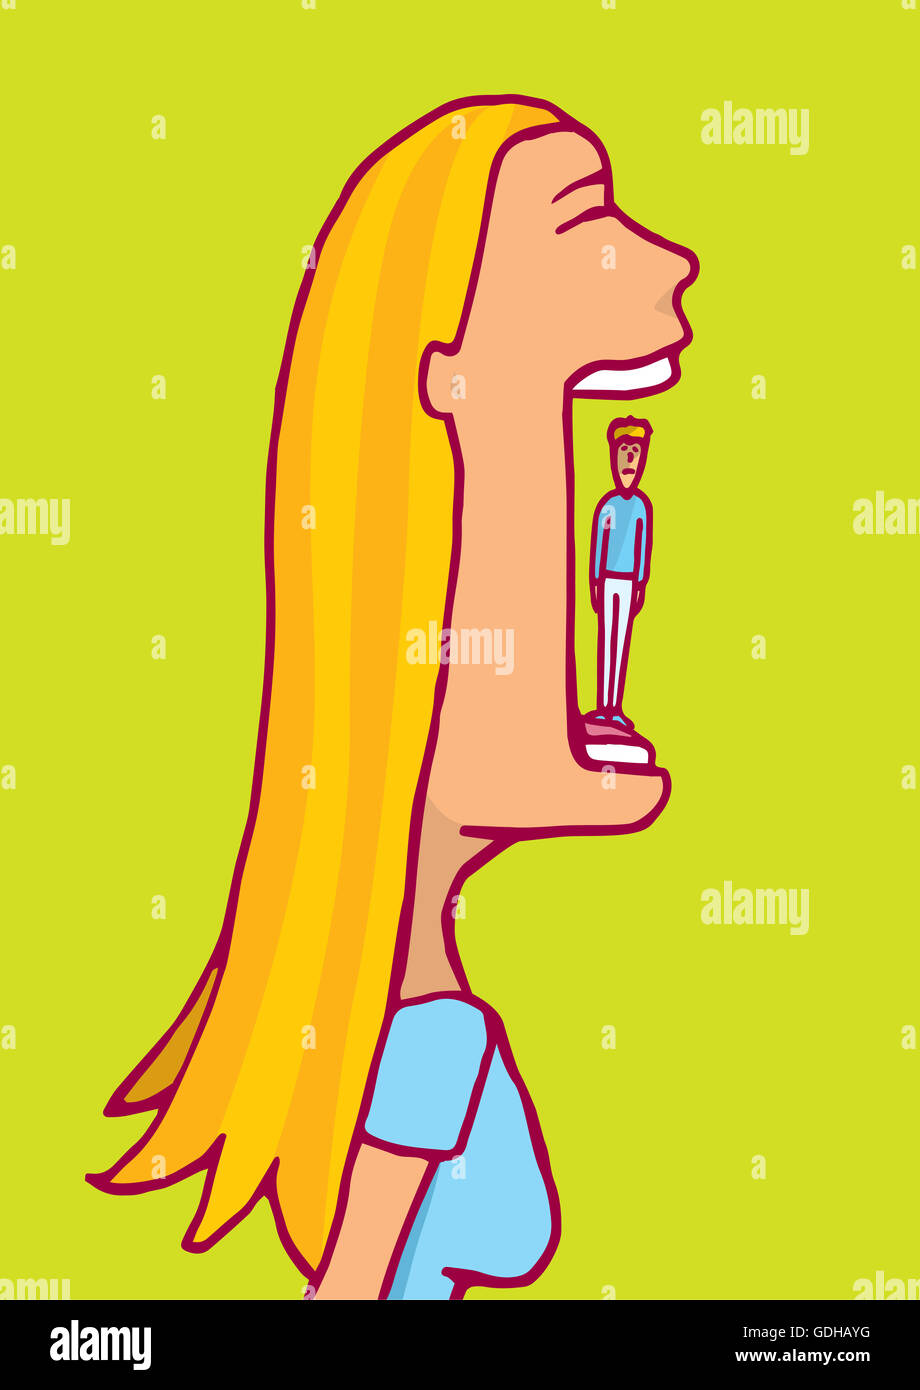 Cartoon illustration of a blonde woman about to eat a tiny man Stock Photo